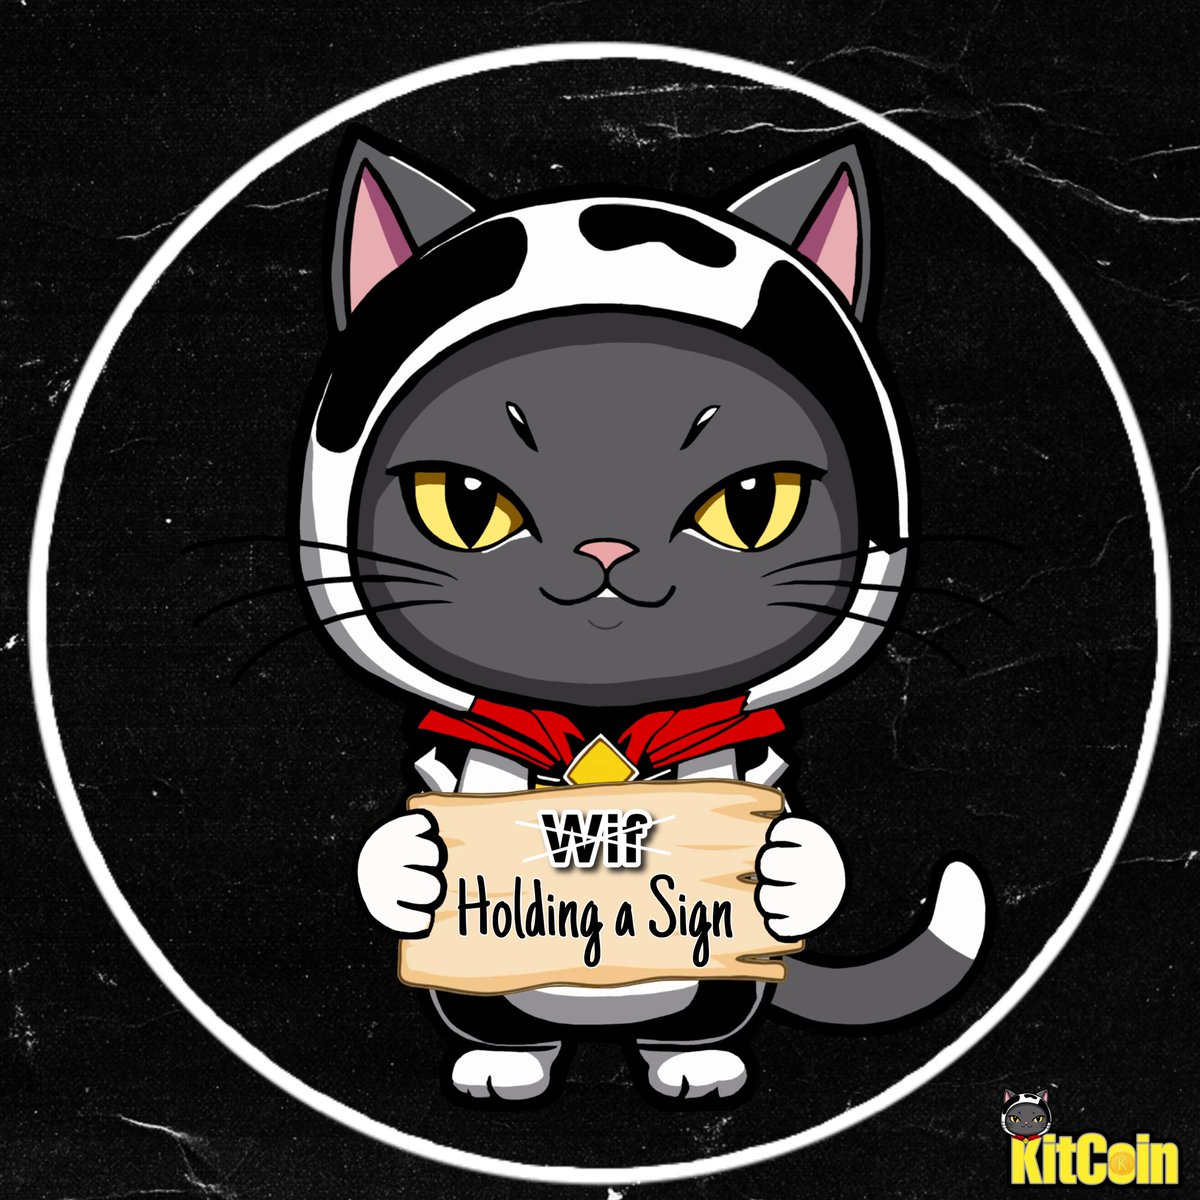 🪂$KITTY Airdrop🪂 For all those Kits that follow these steps you will be blessed with some $KITTY 👍Like 🔄Retweet 🚶Follow 👉Tag 5 Friends Drop your wallet Join our telegram 🪧 t.me/+NfKabTnSaxgyM… Discord coming 🔜 #CroFam #Cronos #FFTB #airdrop #KitCoin #MEOW